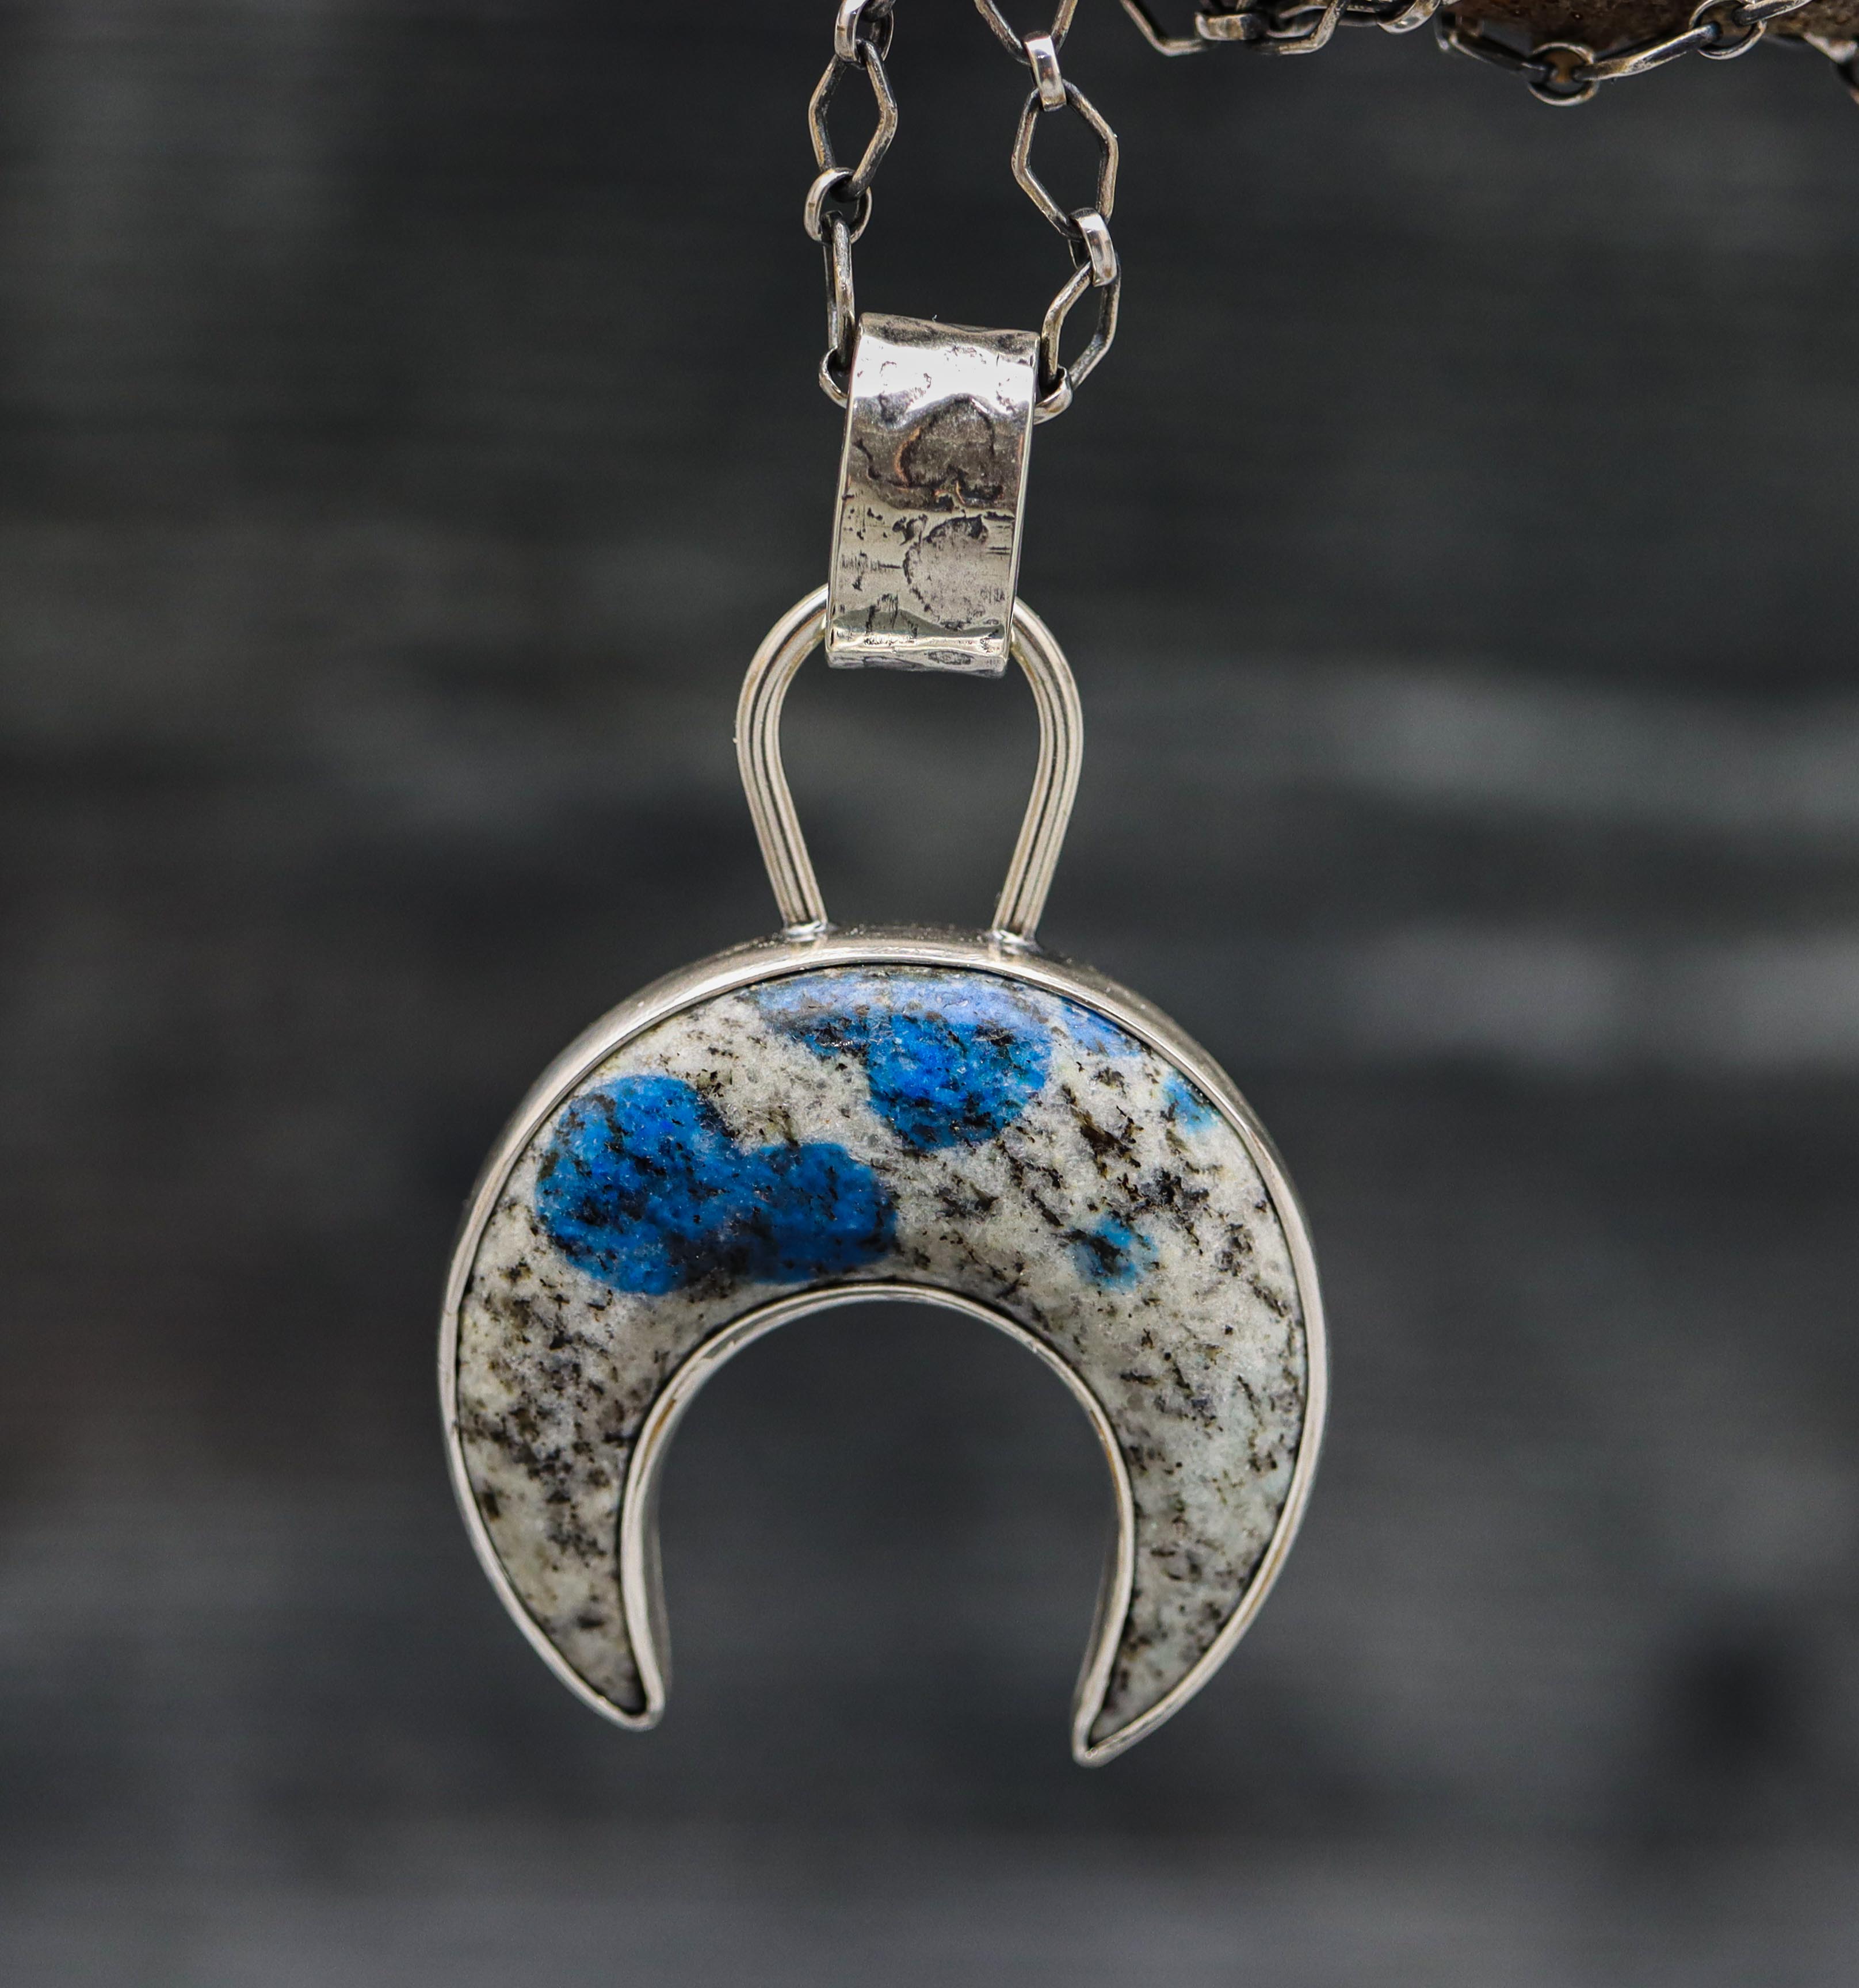 Crescent Moon Pendant Necklace Sterling Silver K2 Granite with Blue Azurite